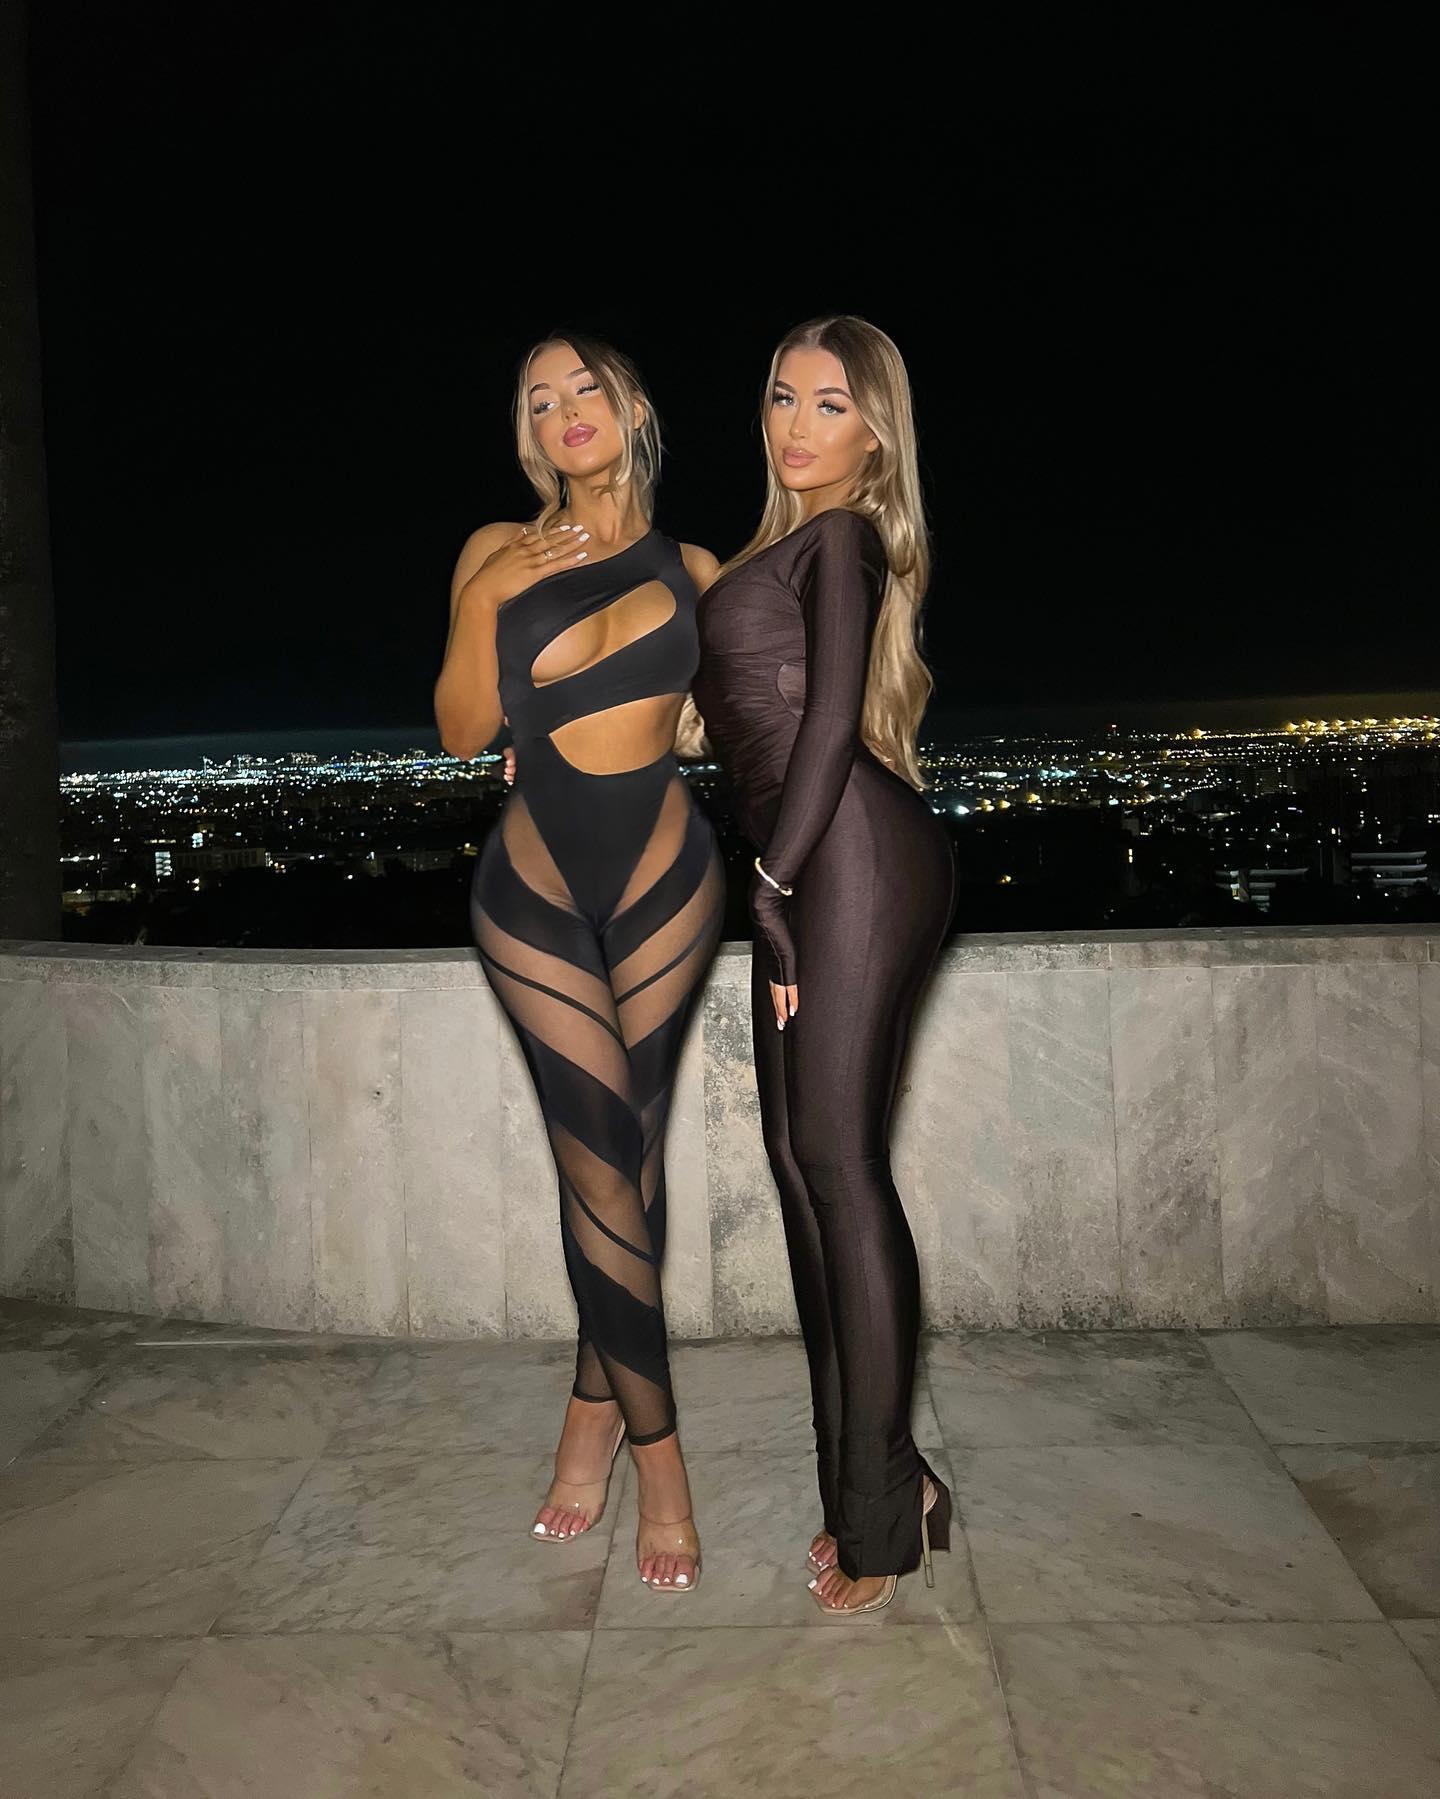 Eve Gale and Jessica Rose Gale pose in sheer bodysuits